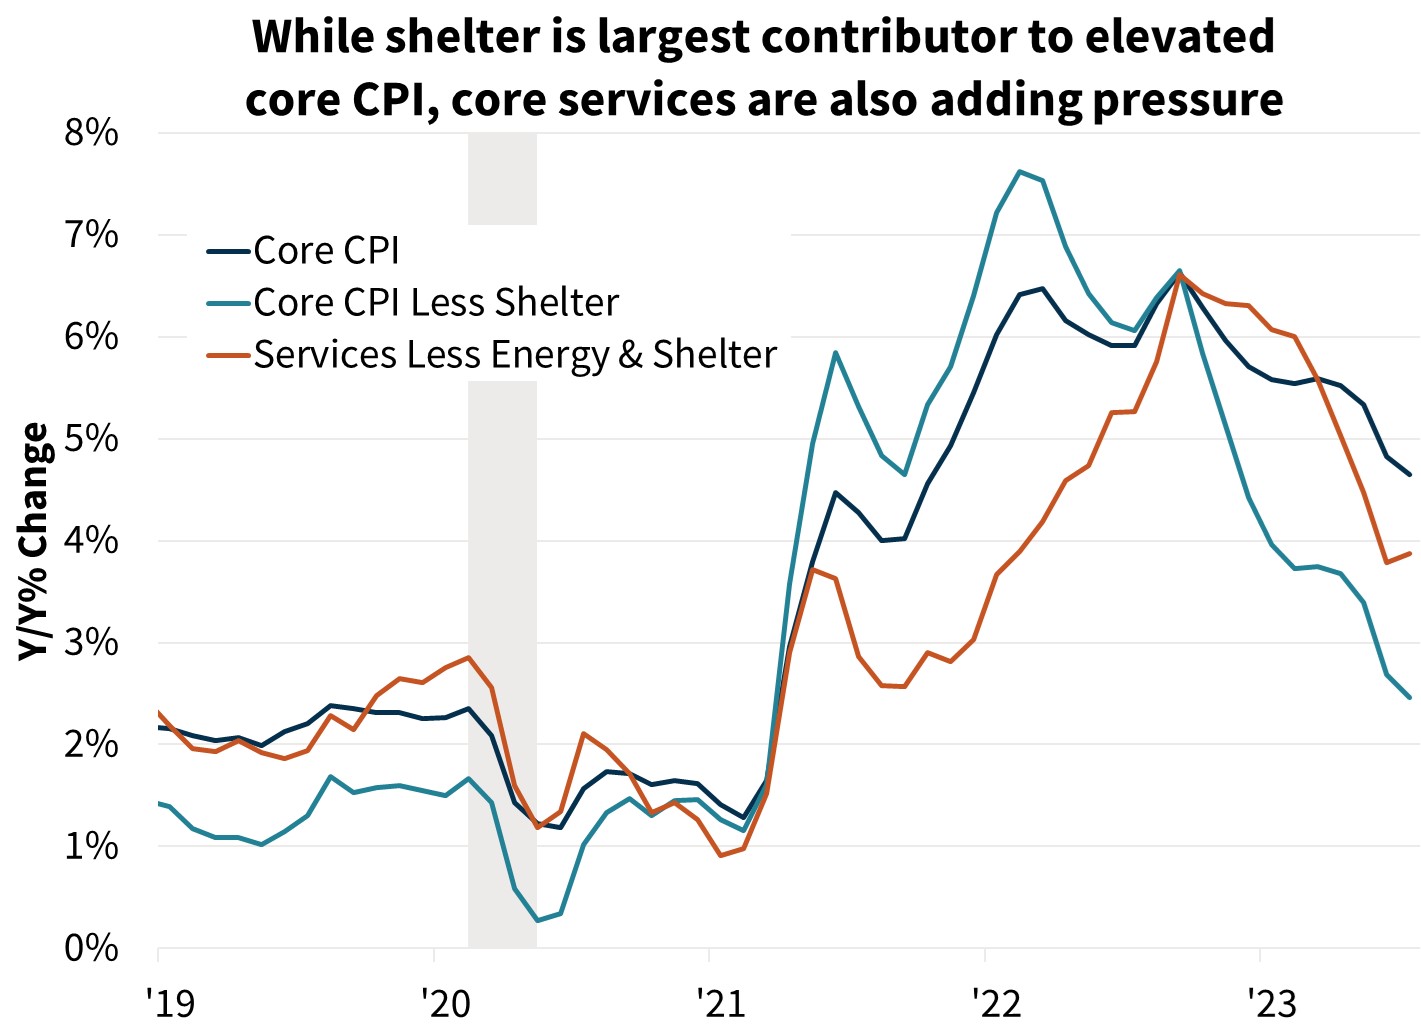  While shelter is largest contributor to elevated core CPI, core services are also adding pressure 